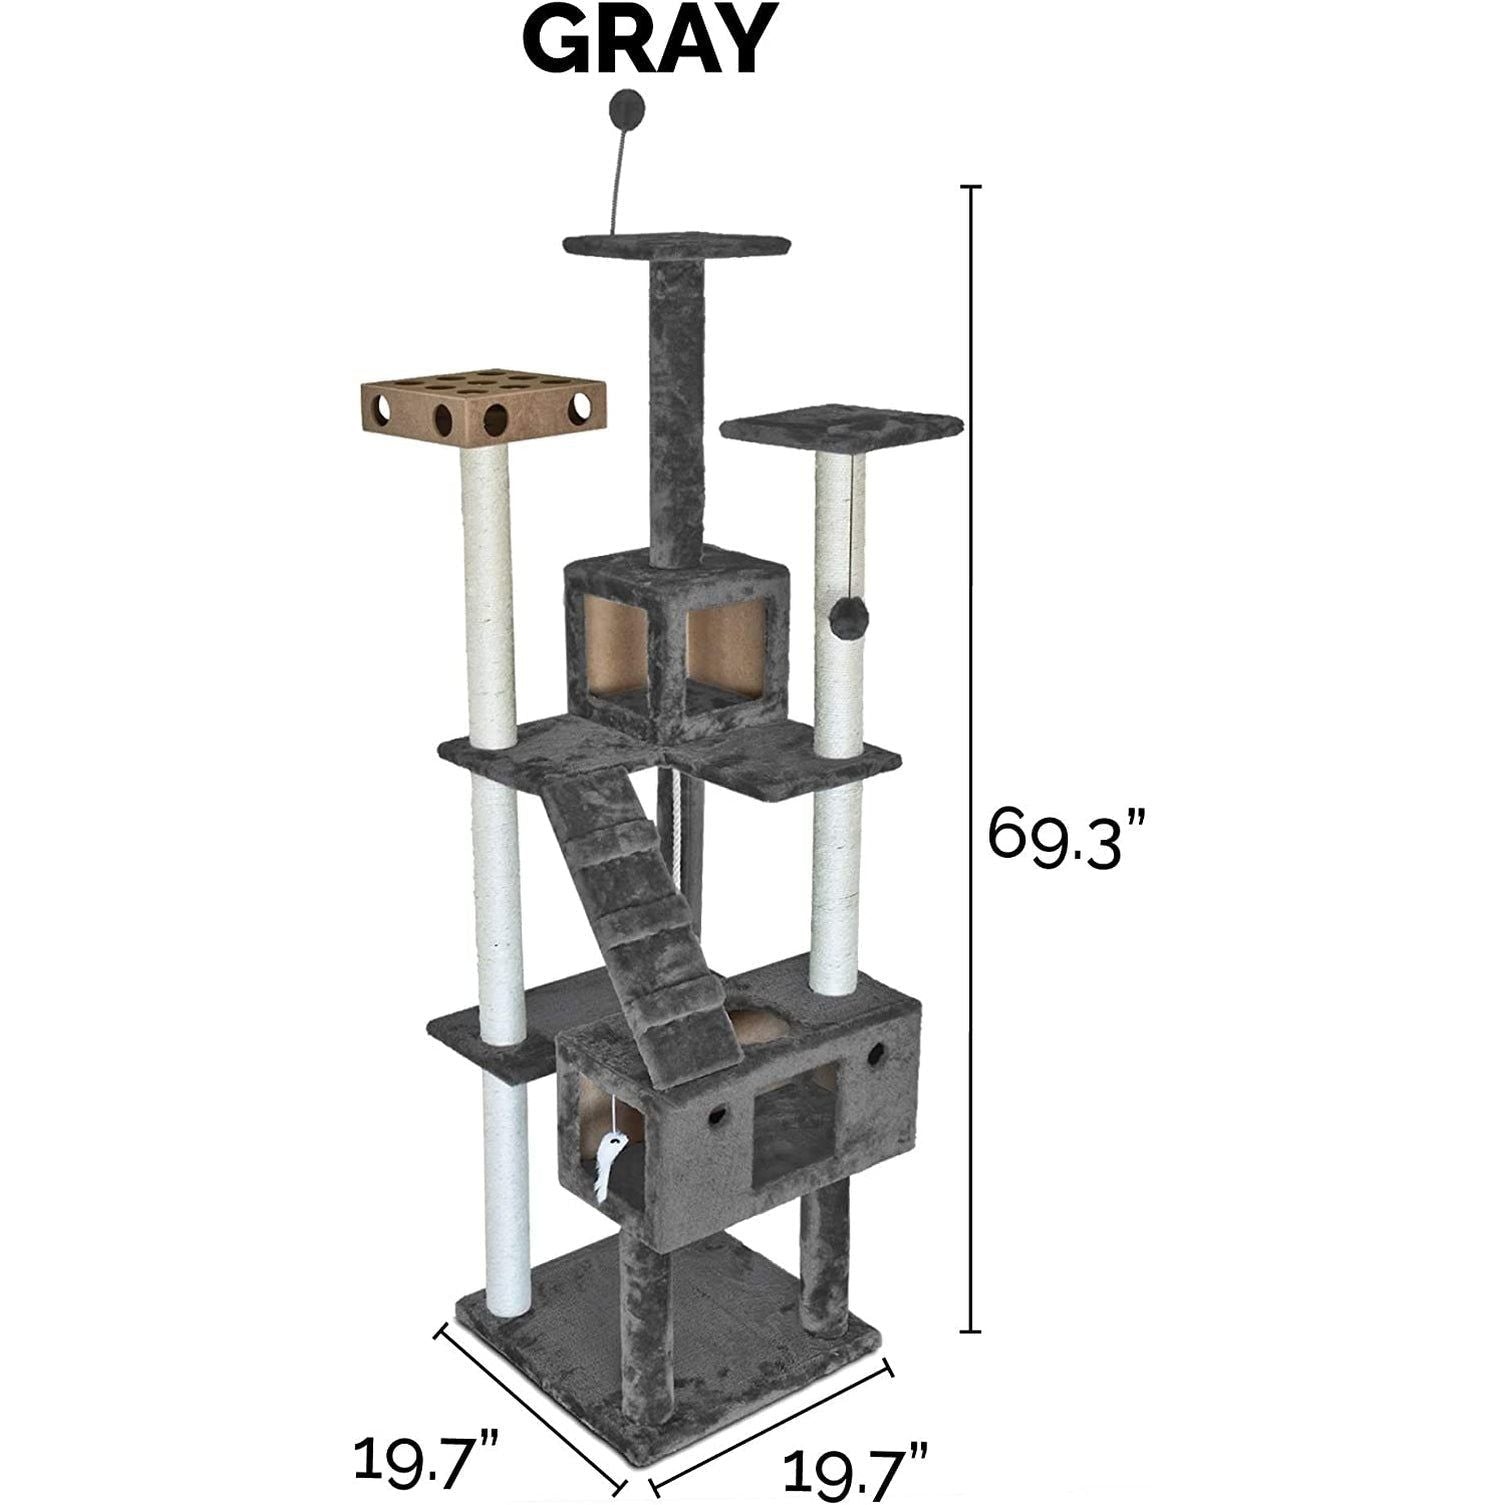 Cat Tree Interactive Playground with Cat Toys and Cat Scratching Post